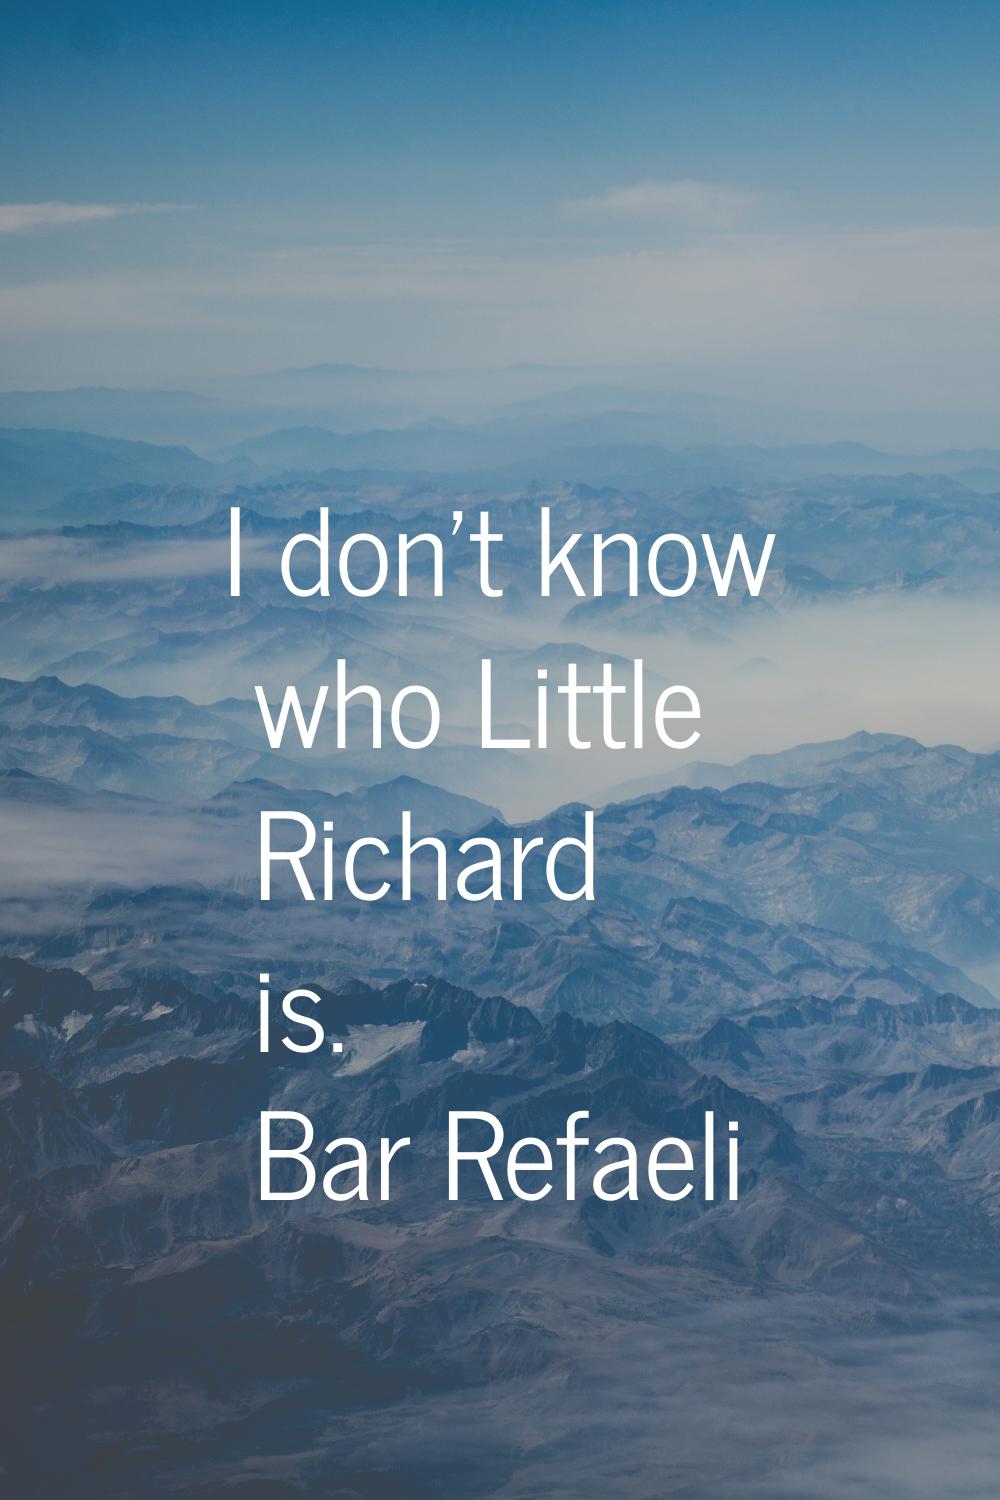 I don't know who Little Richard is.